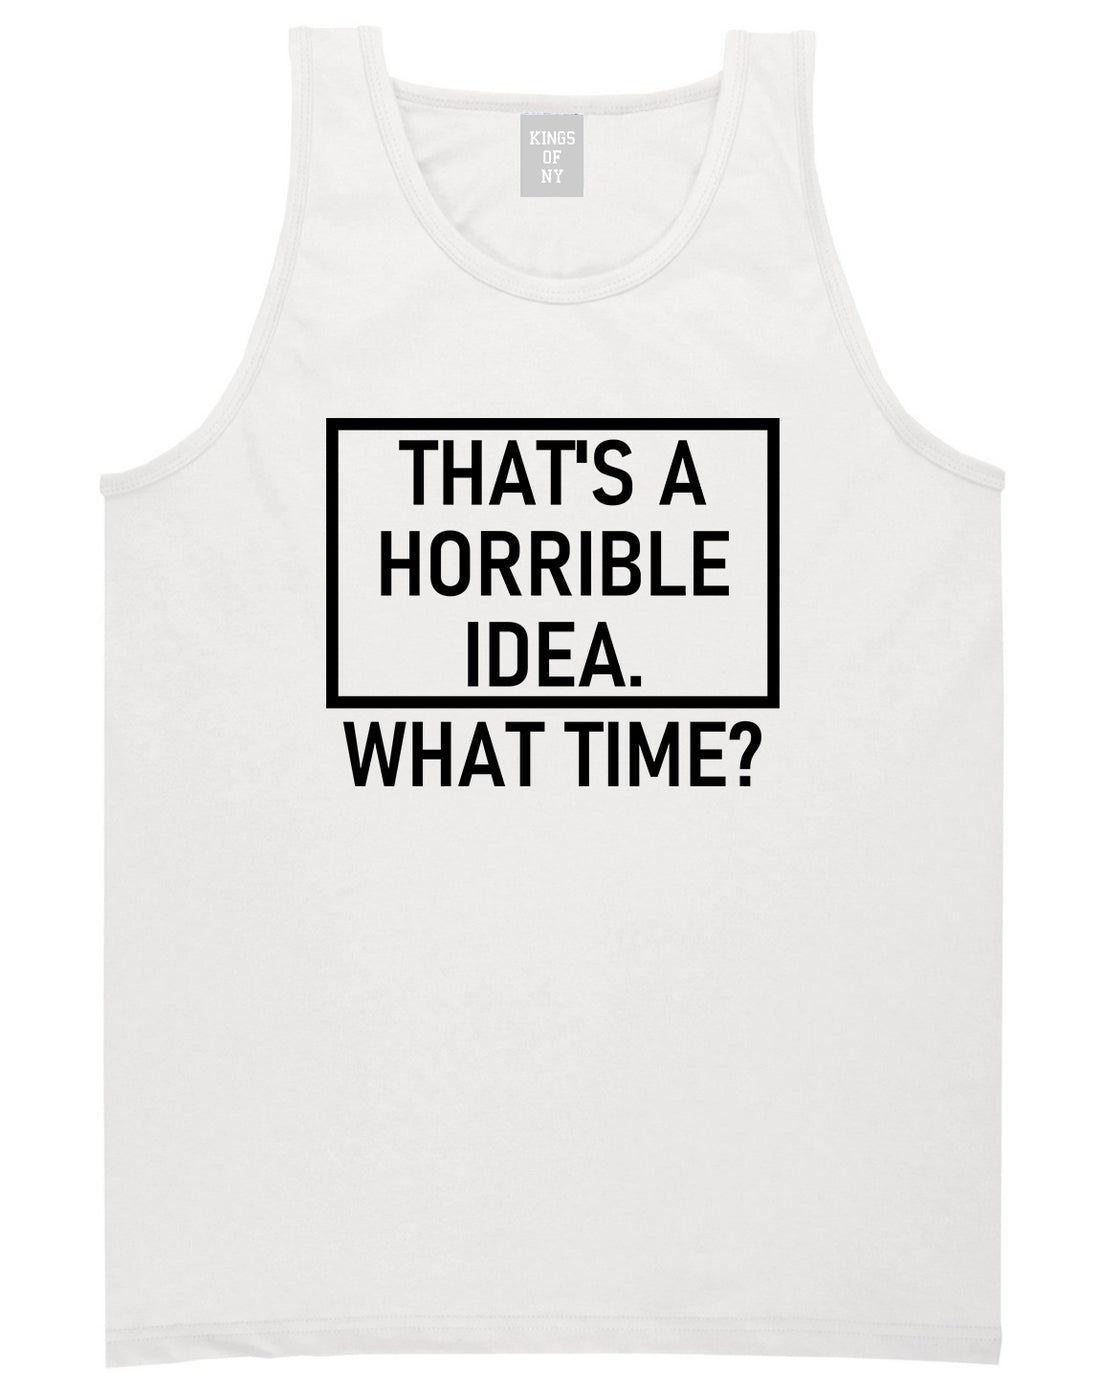 Thats A Horrible Idea What Time Funny Mens Tank Top T-Shirt White